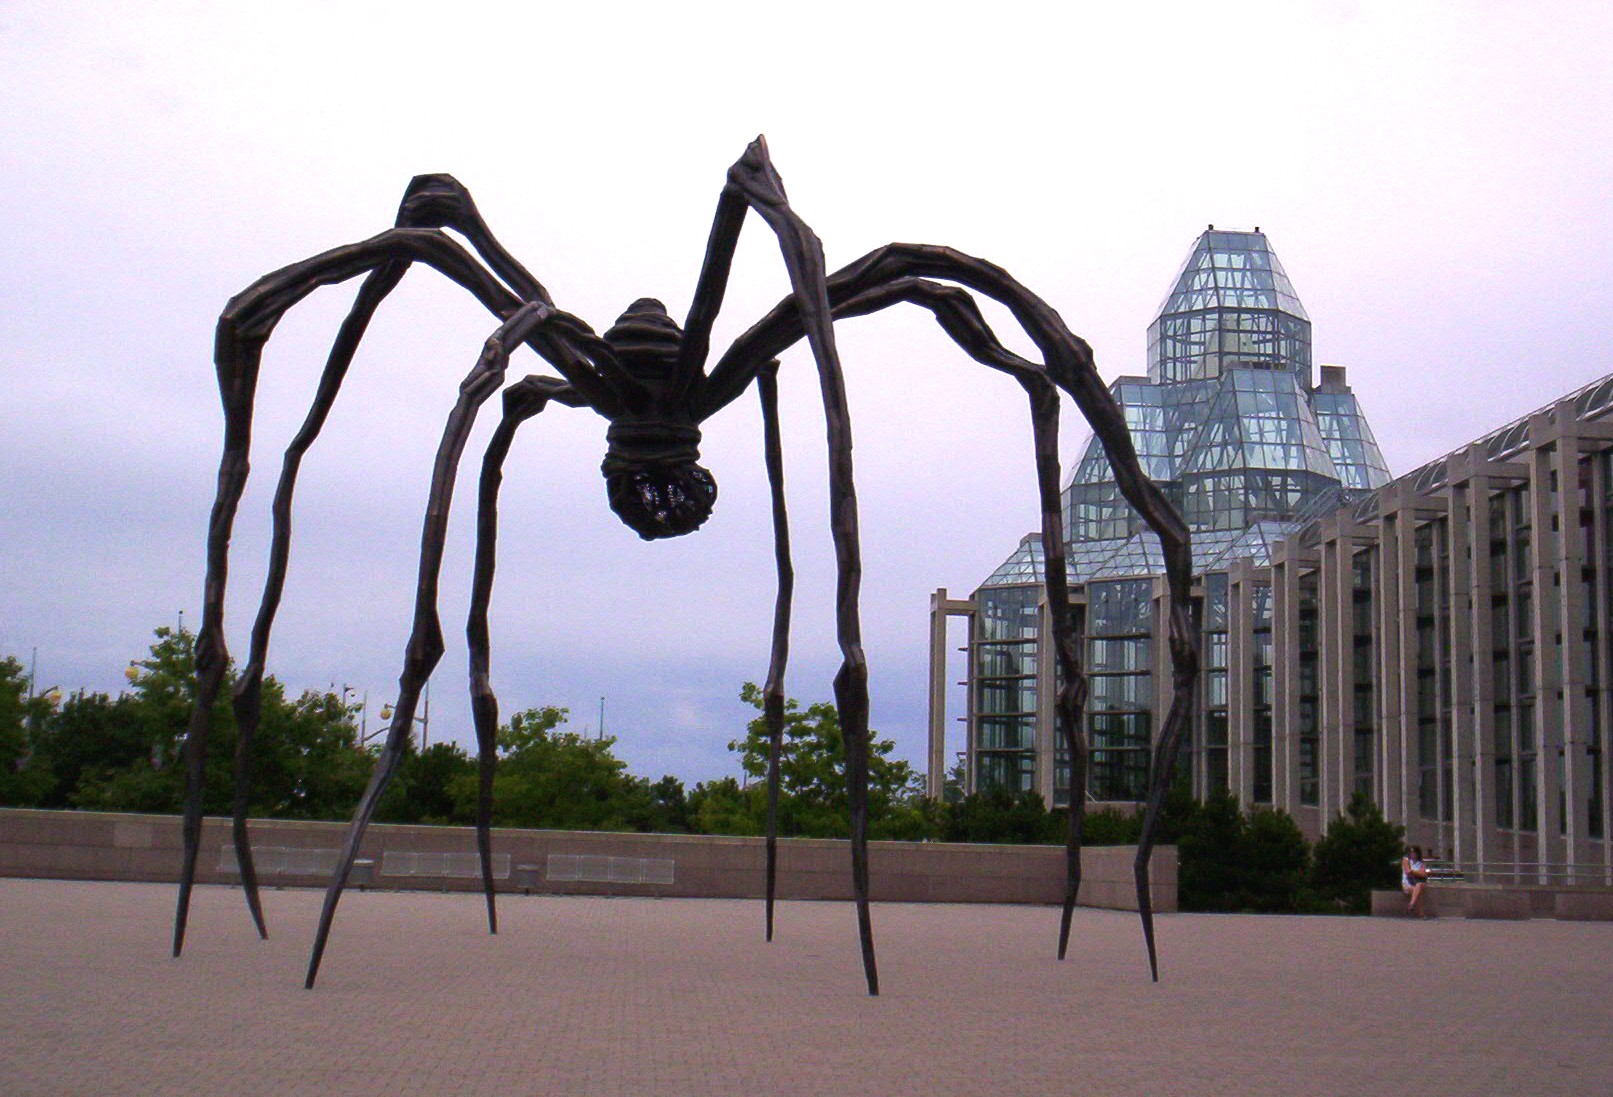 Louise Bourgeois, "Maman", the National Gallery of Canada